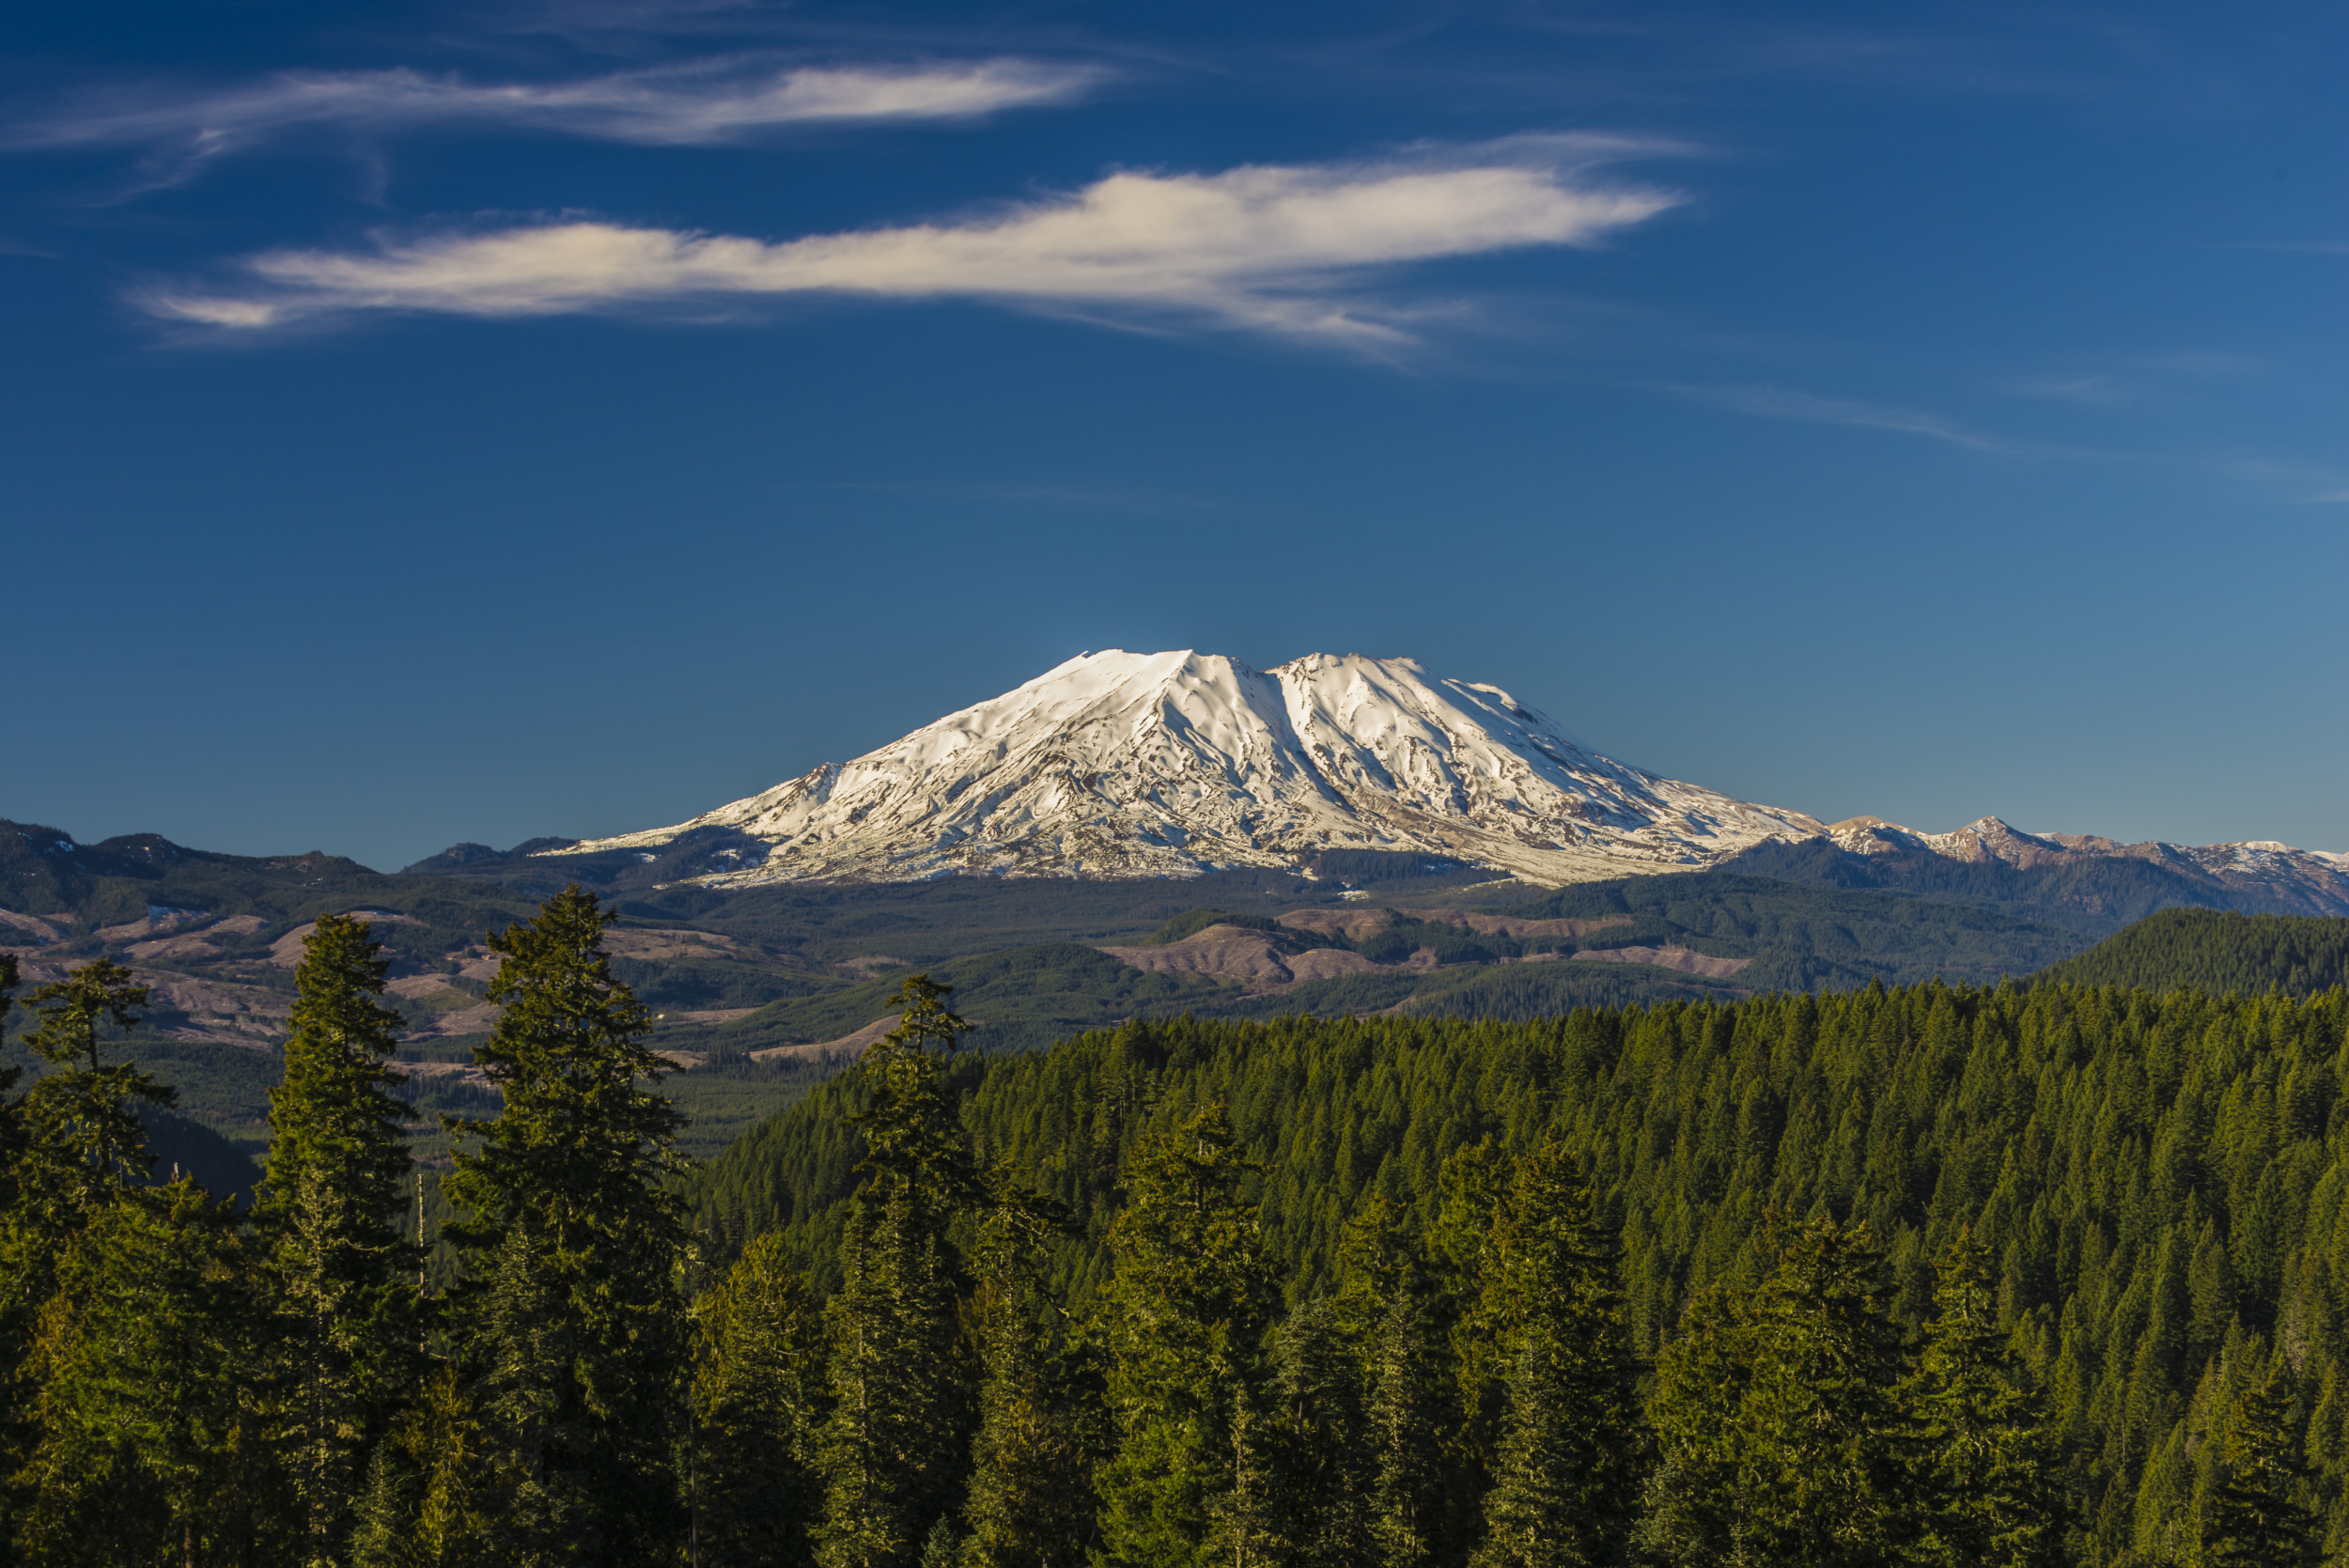 Mount St. Helens at Risk of Volcanic Eruption Caused by Extreme Rainfall